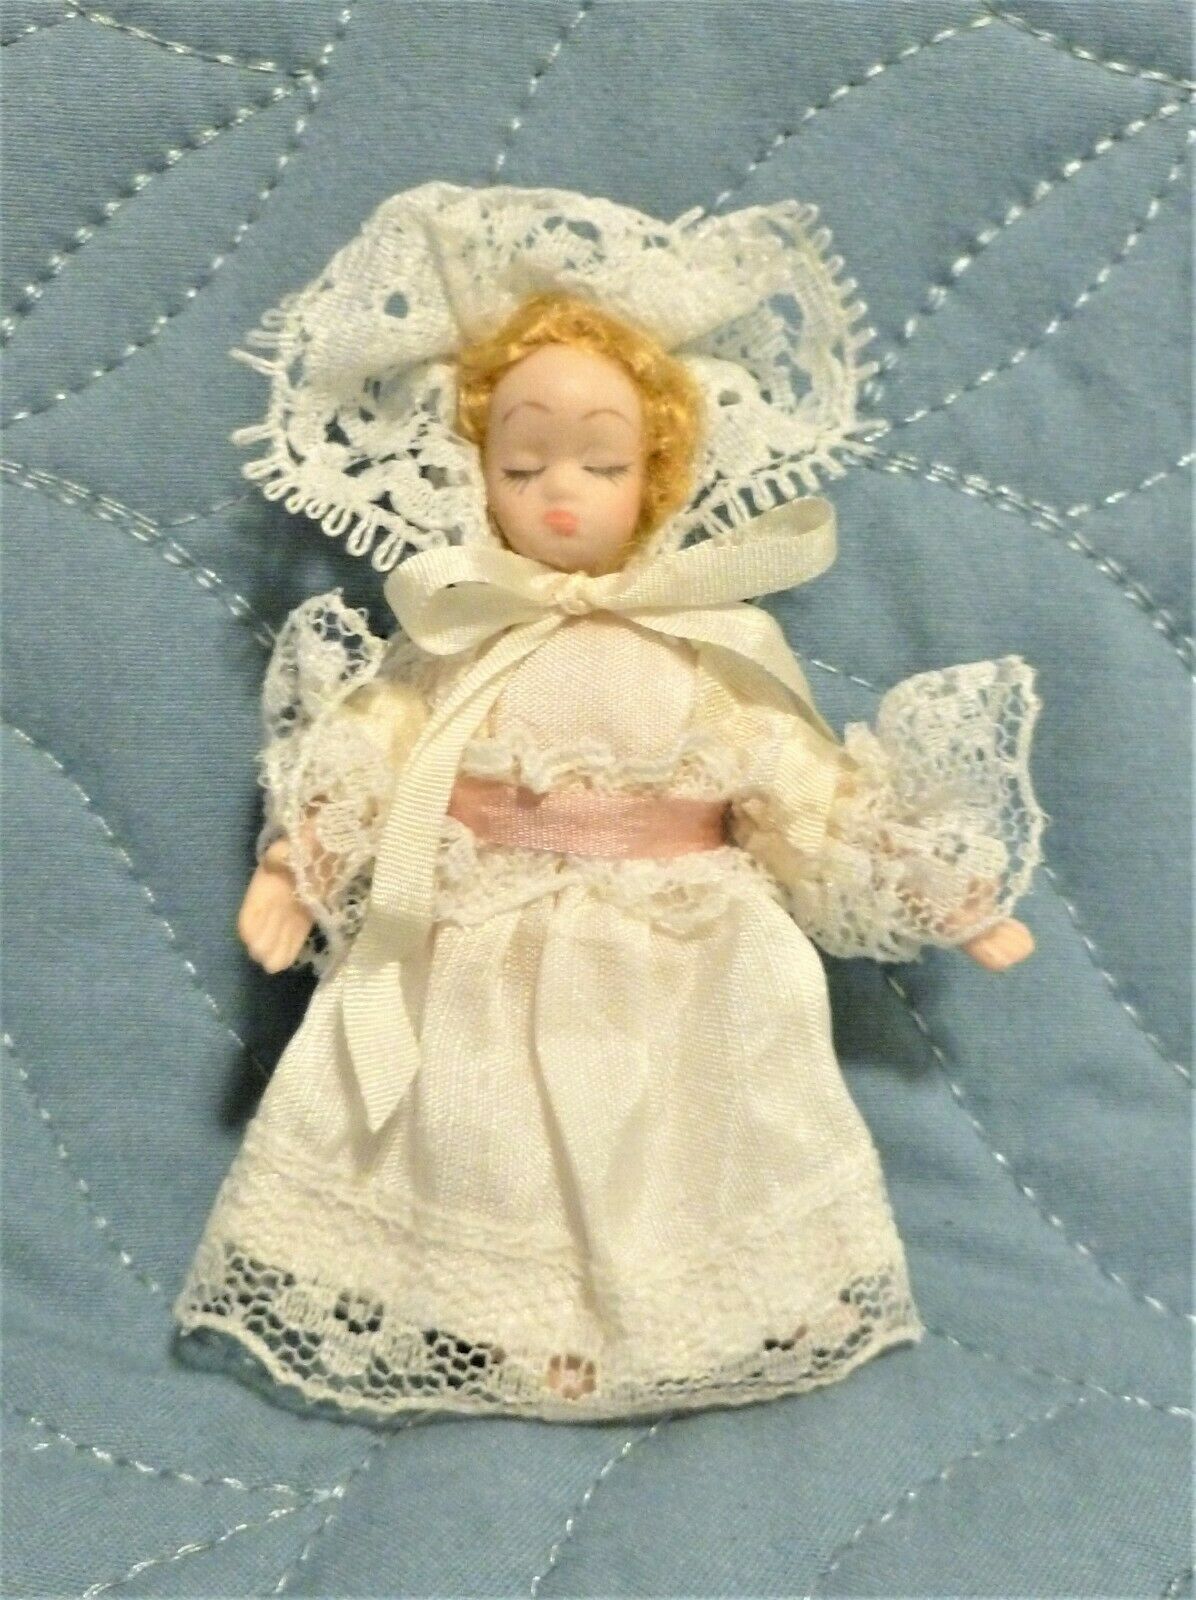 Miniature Fancy Porcelain Girl Doll, Lacy Outfit, Soft Body Center, 2.8" Tall